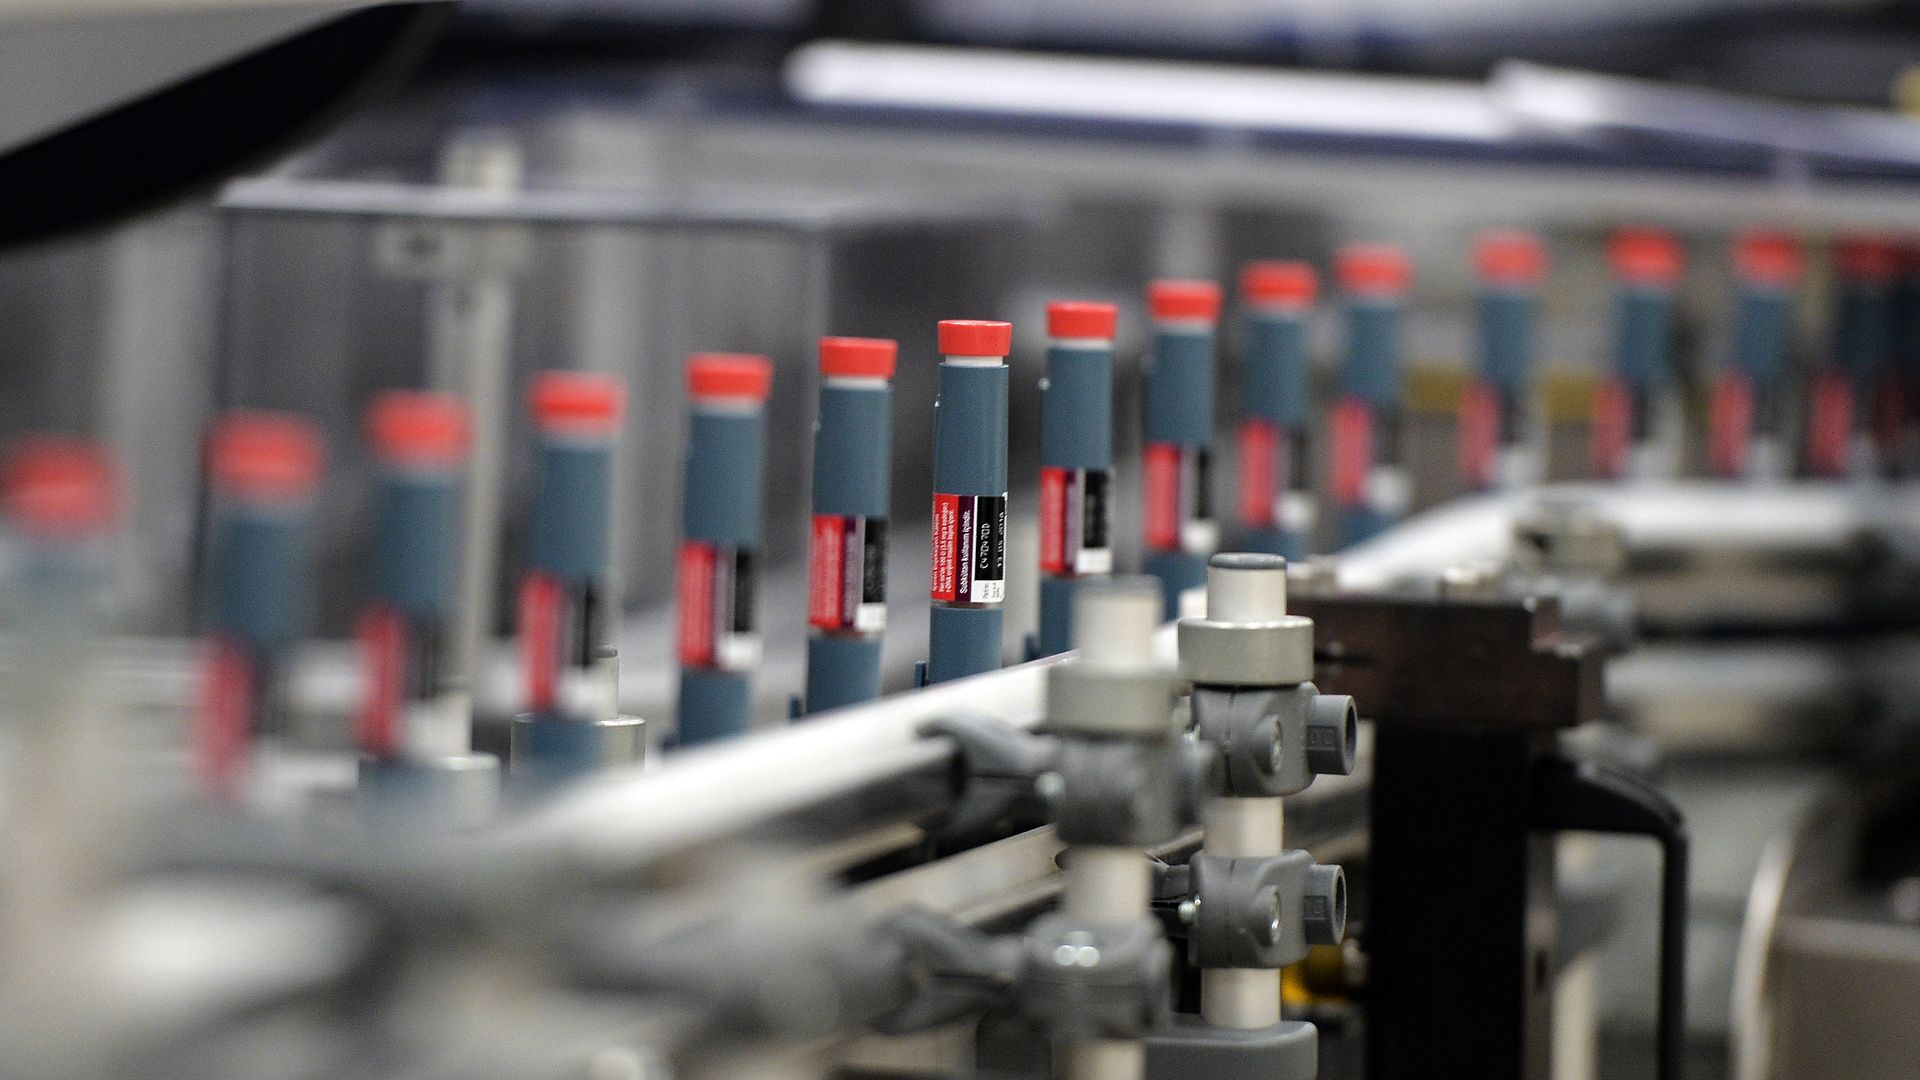 Insulin pens on an assembly line.